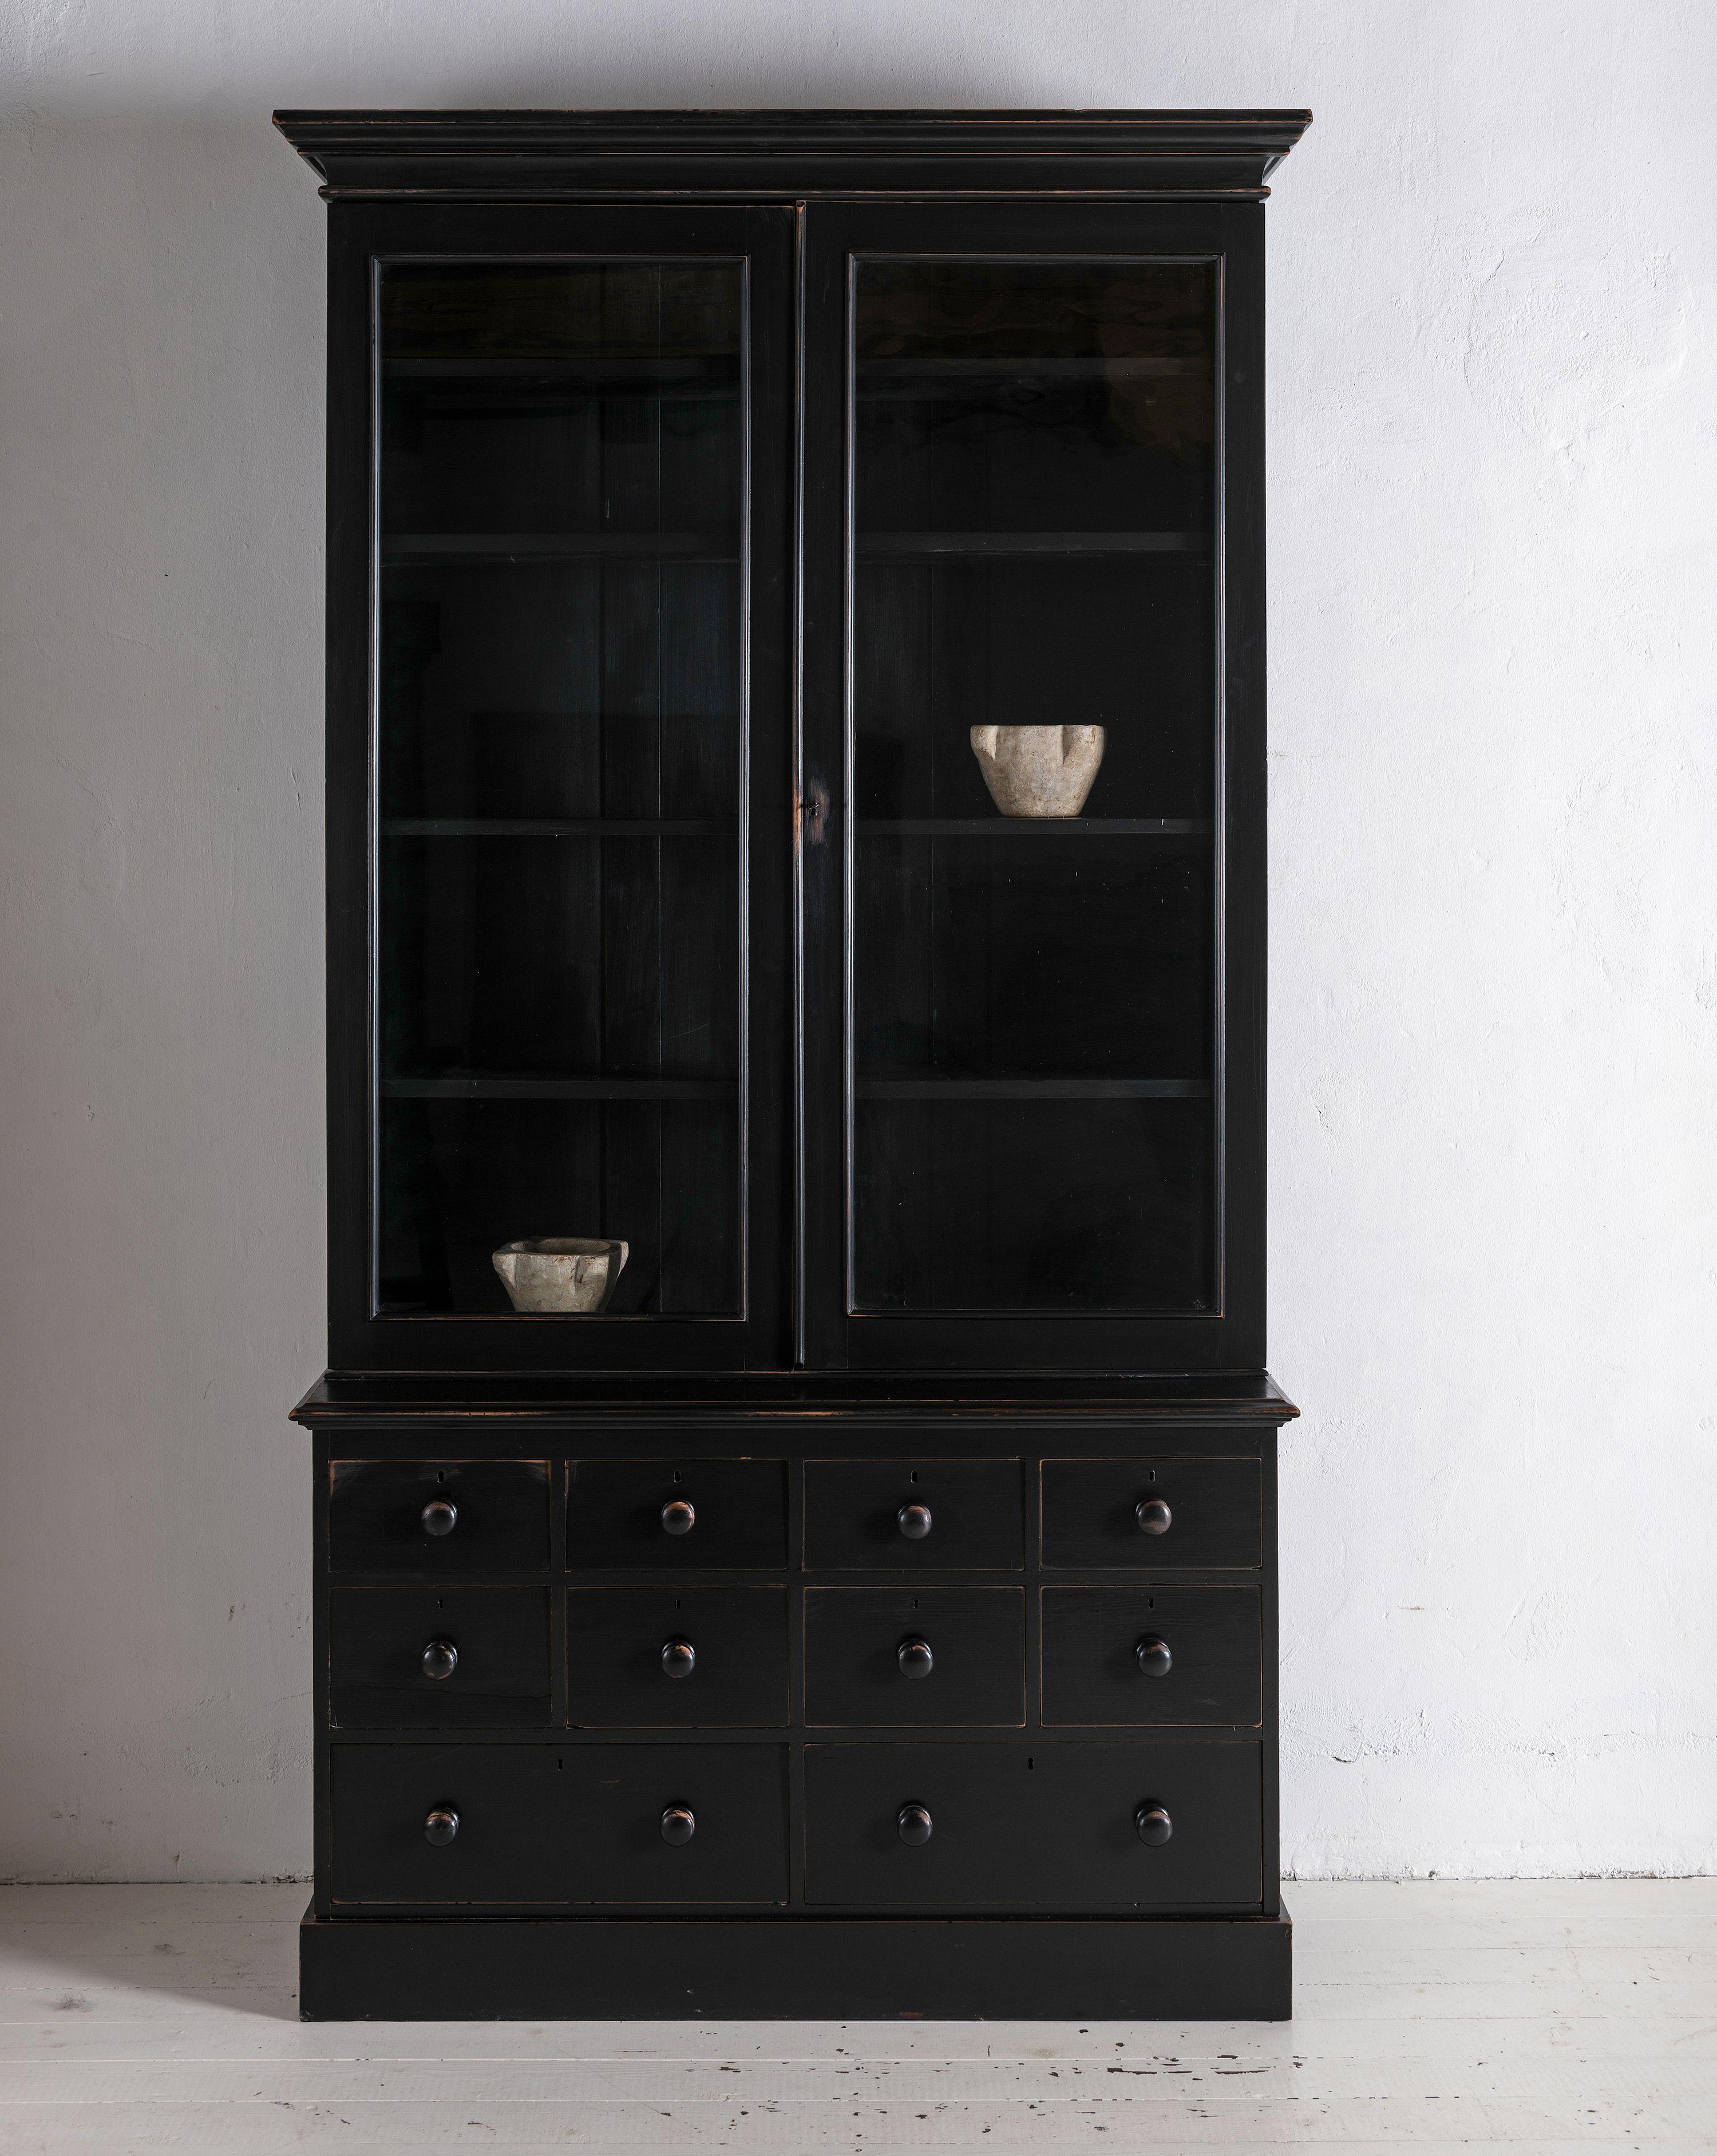 Stylish Black Painted Edwardian Glazed Bookcase or Buffet with Original Glass In Good Condition For Sale In Jesteburg, DE